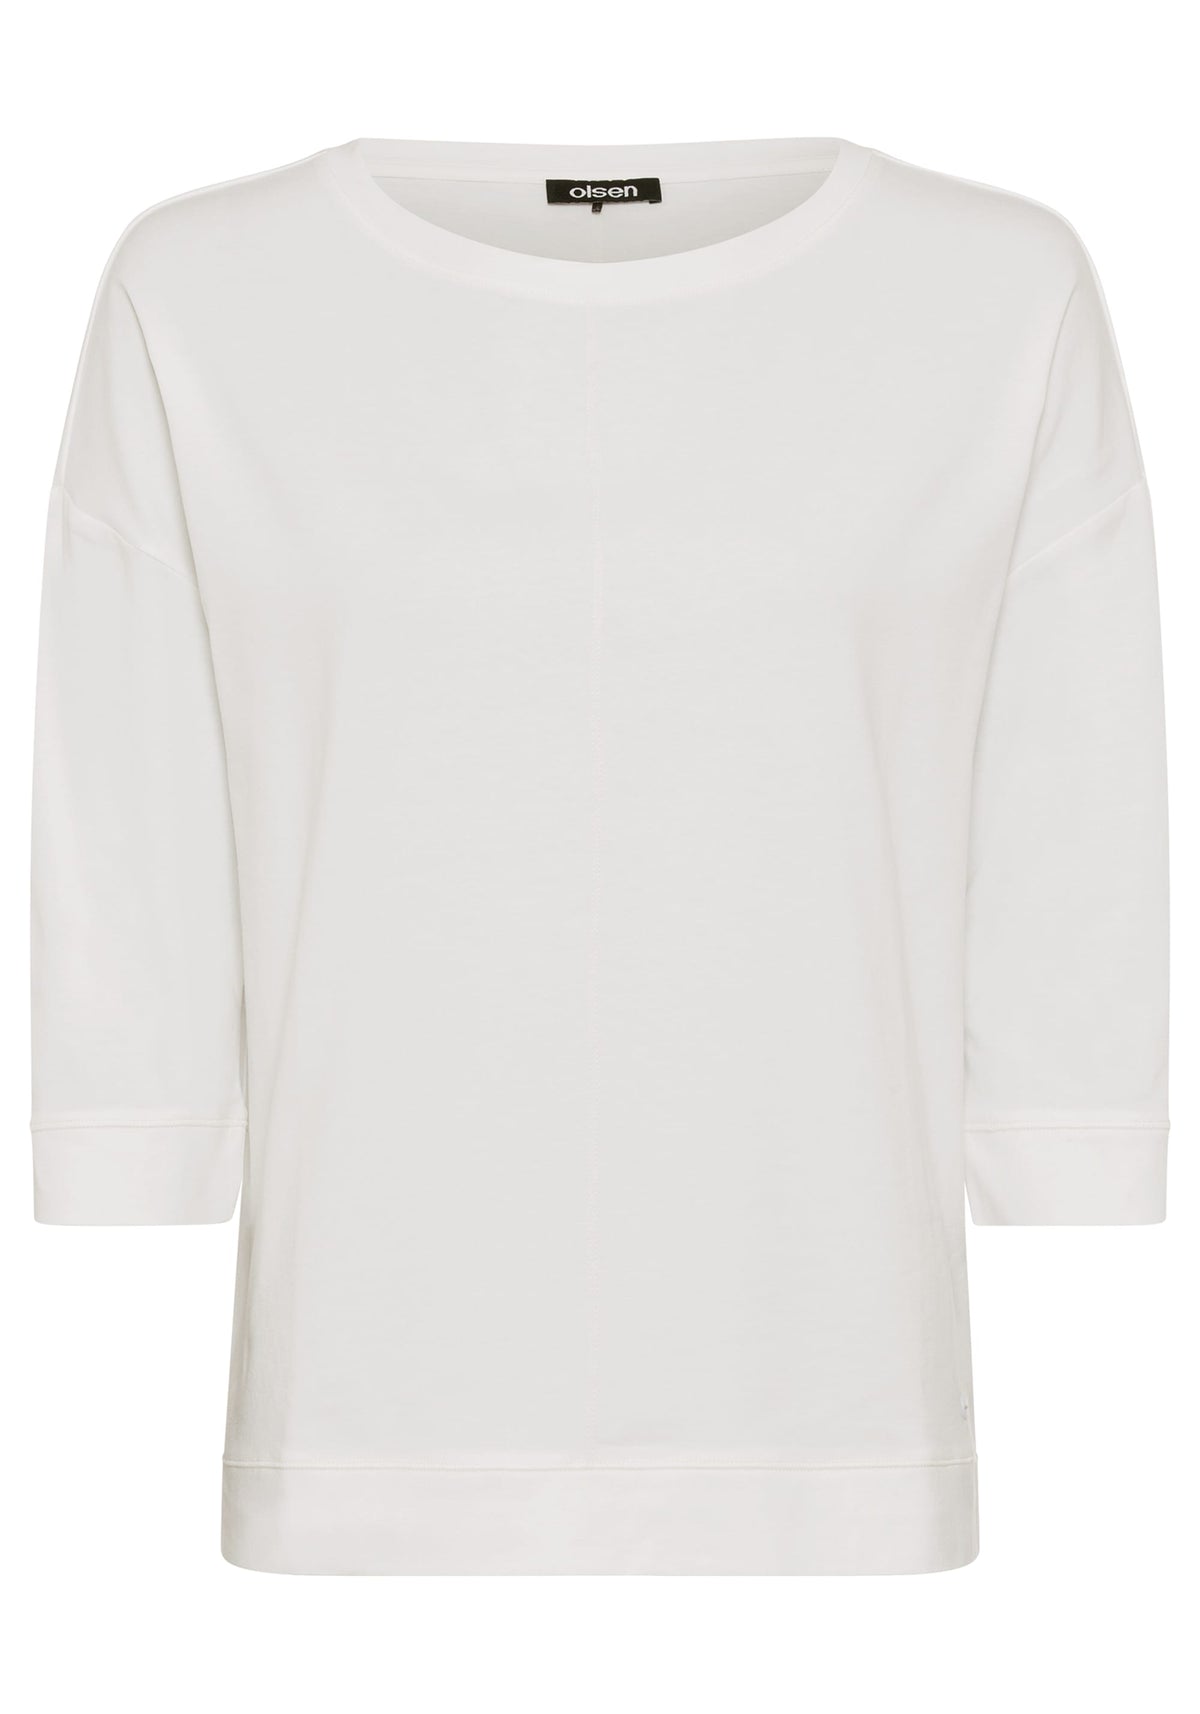 Cotton Blend 3/4 Sleeve Solid T-Shirt